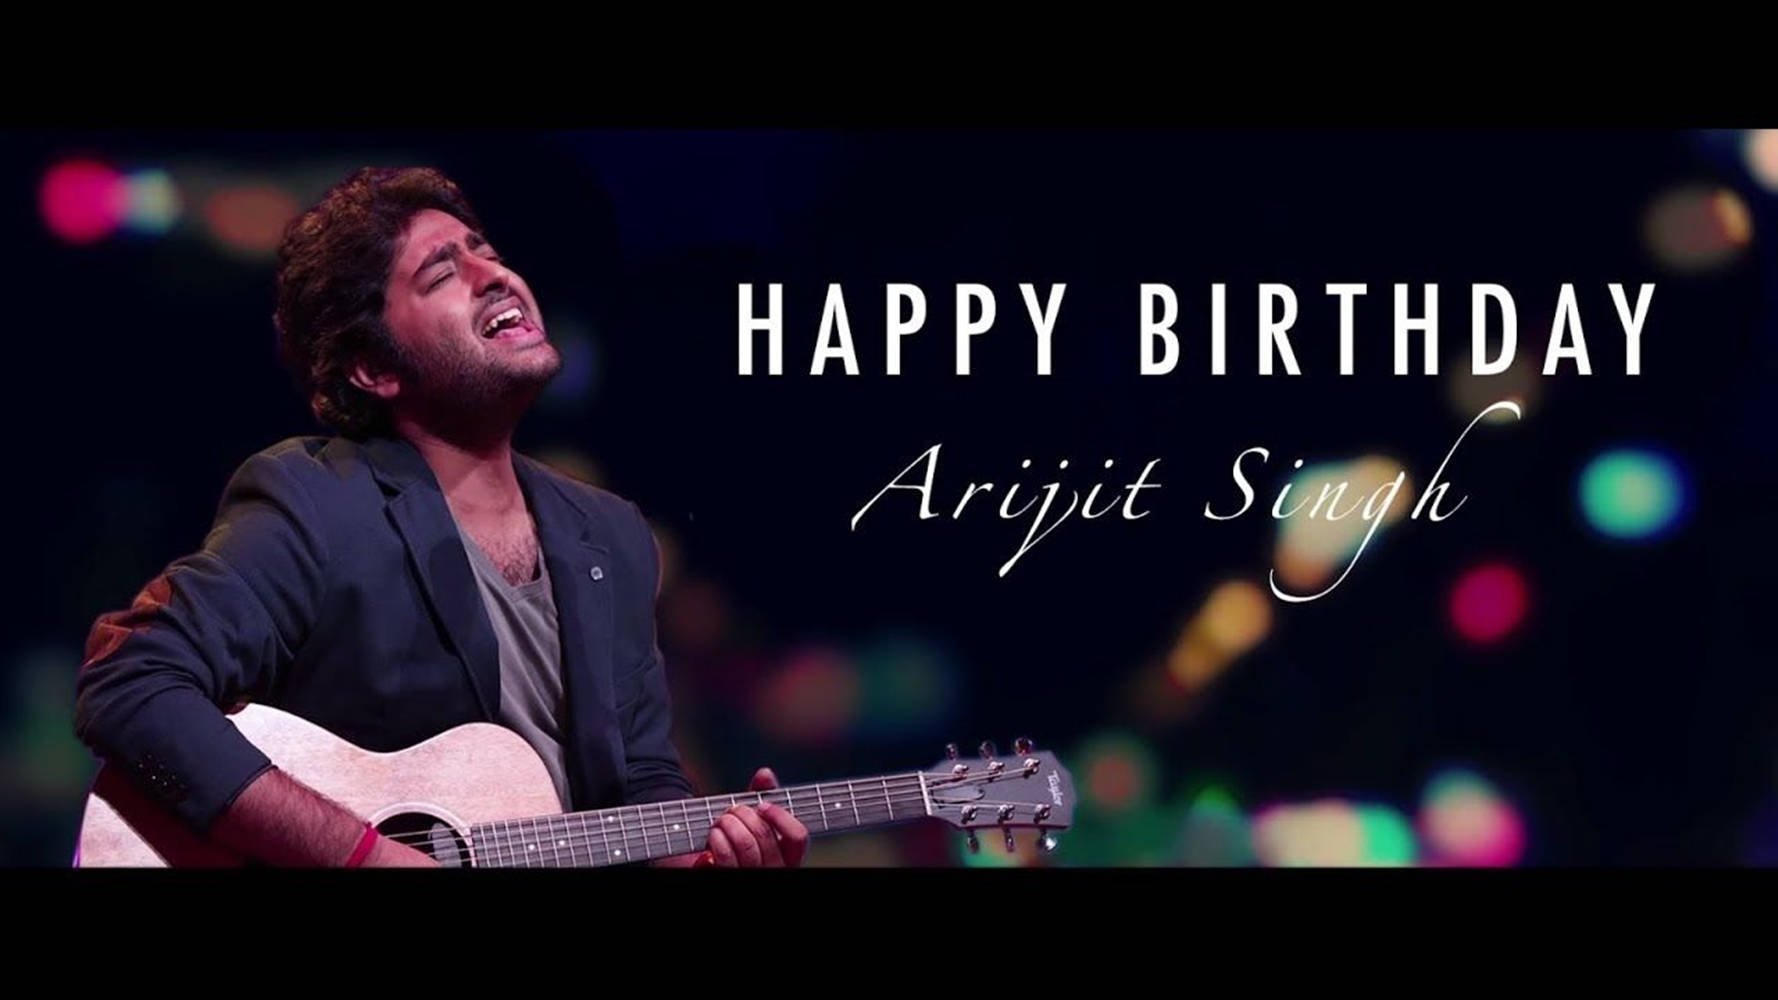 Födelsedagsgratulationertill Arijit Singh. (in The Context Of Computer Or Mobile Wallpaper, This Would Be Written As A Caption Or Message On The Wallpaper Dedicated To Arijit Singh For His Birthday.) Wallpaper